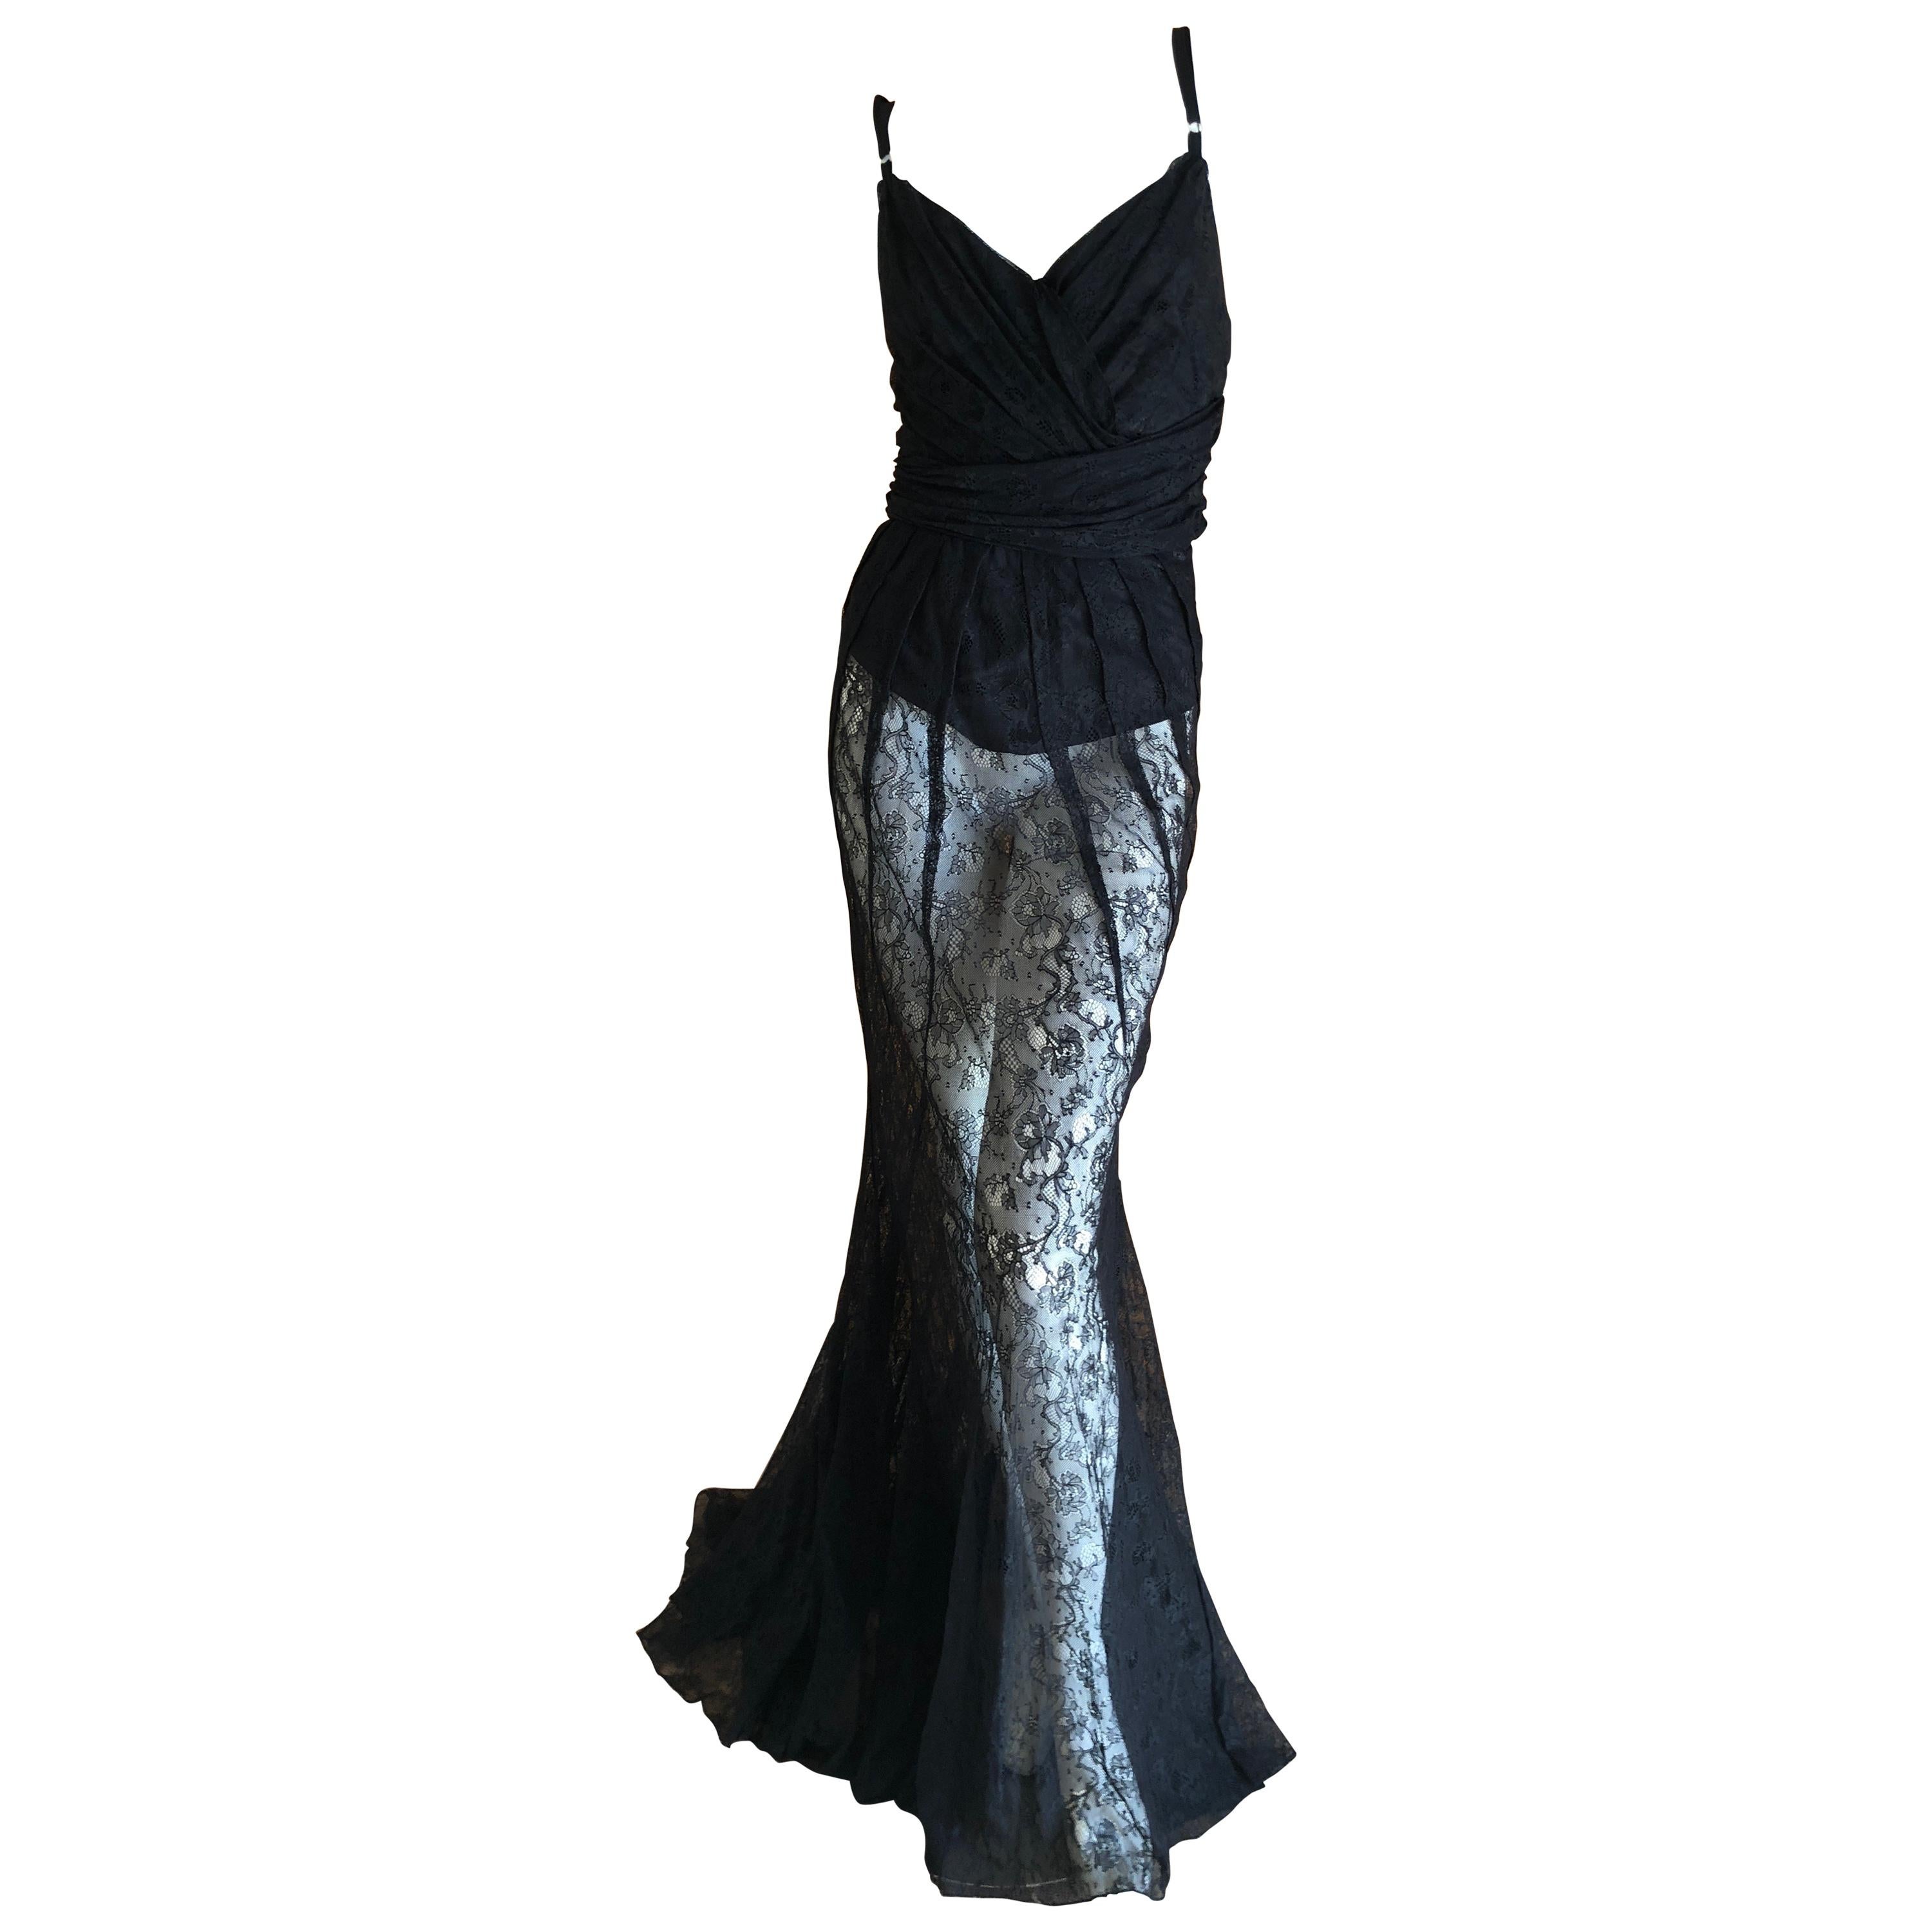 D&G Dolce & Gabbana Sheer Black Lace Vintage Evening Dress with Train For Sale